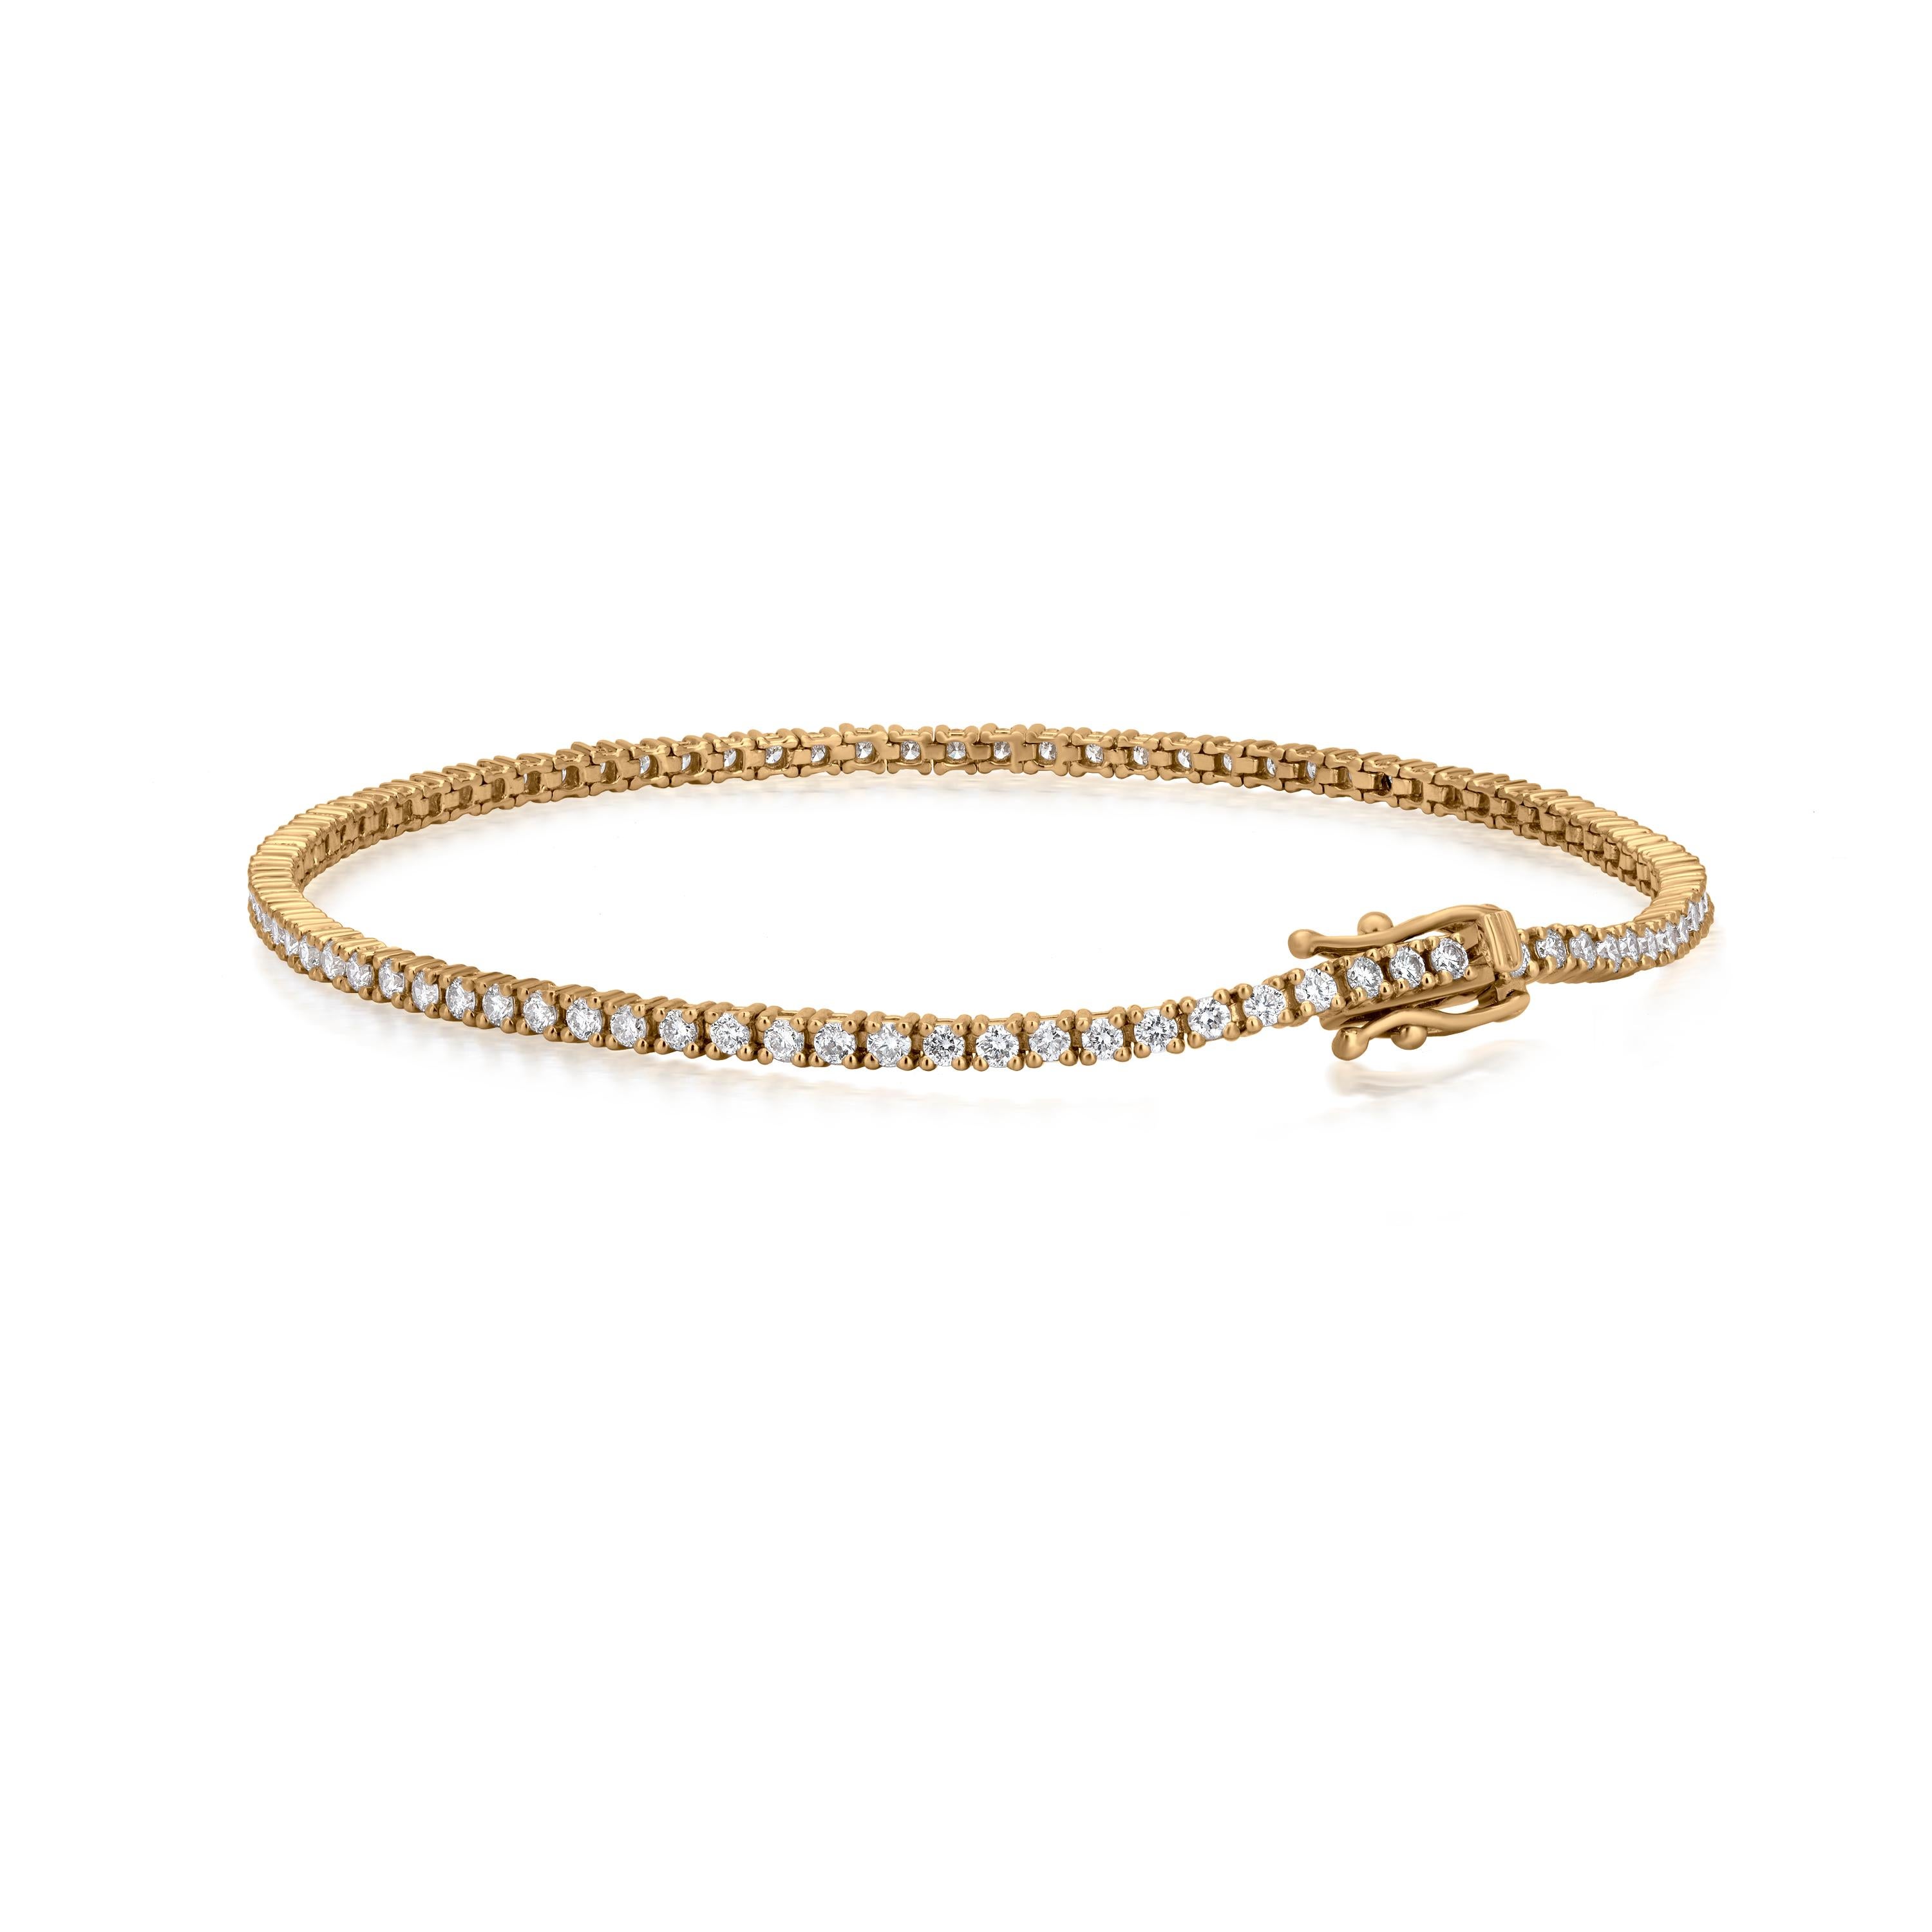 Manifested on an 18K Yellow Gold body, this Luxle tennis bracelet is made up of sparkling white diamonds that are round full-cut, set in a prong. The diamonds weigh 1.6 Cts. The diamonds are I1 in clarity and GH in color. This sleek bracelet has an